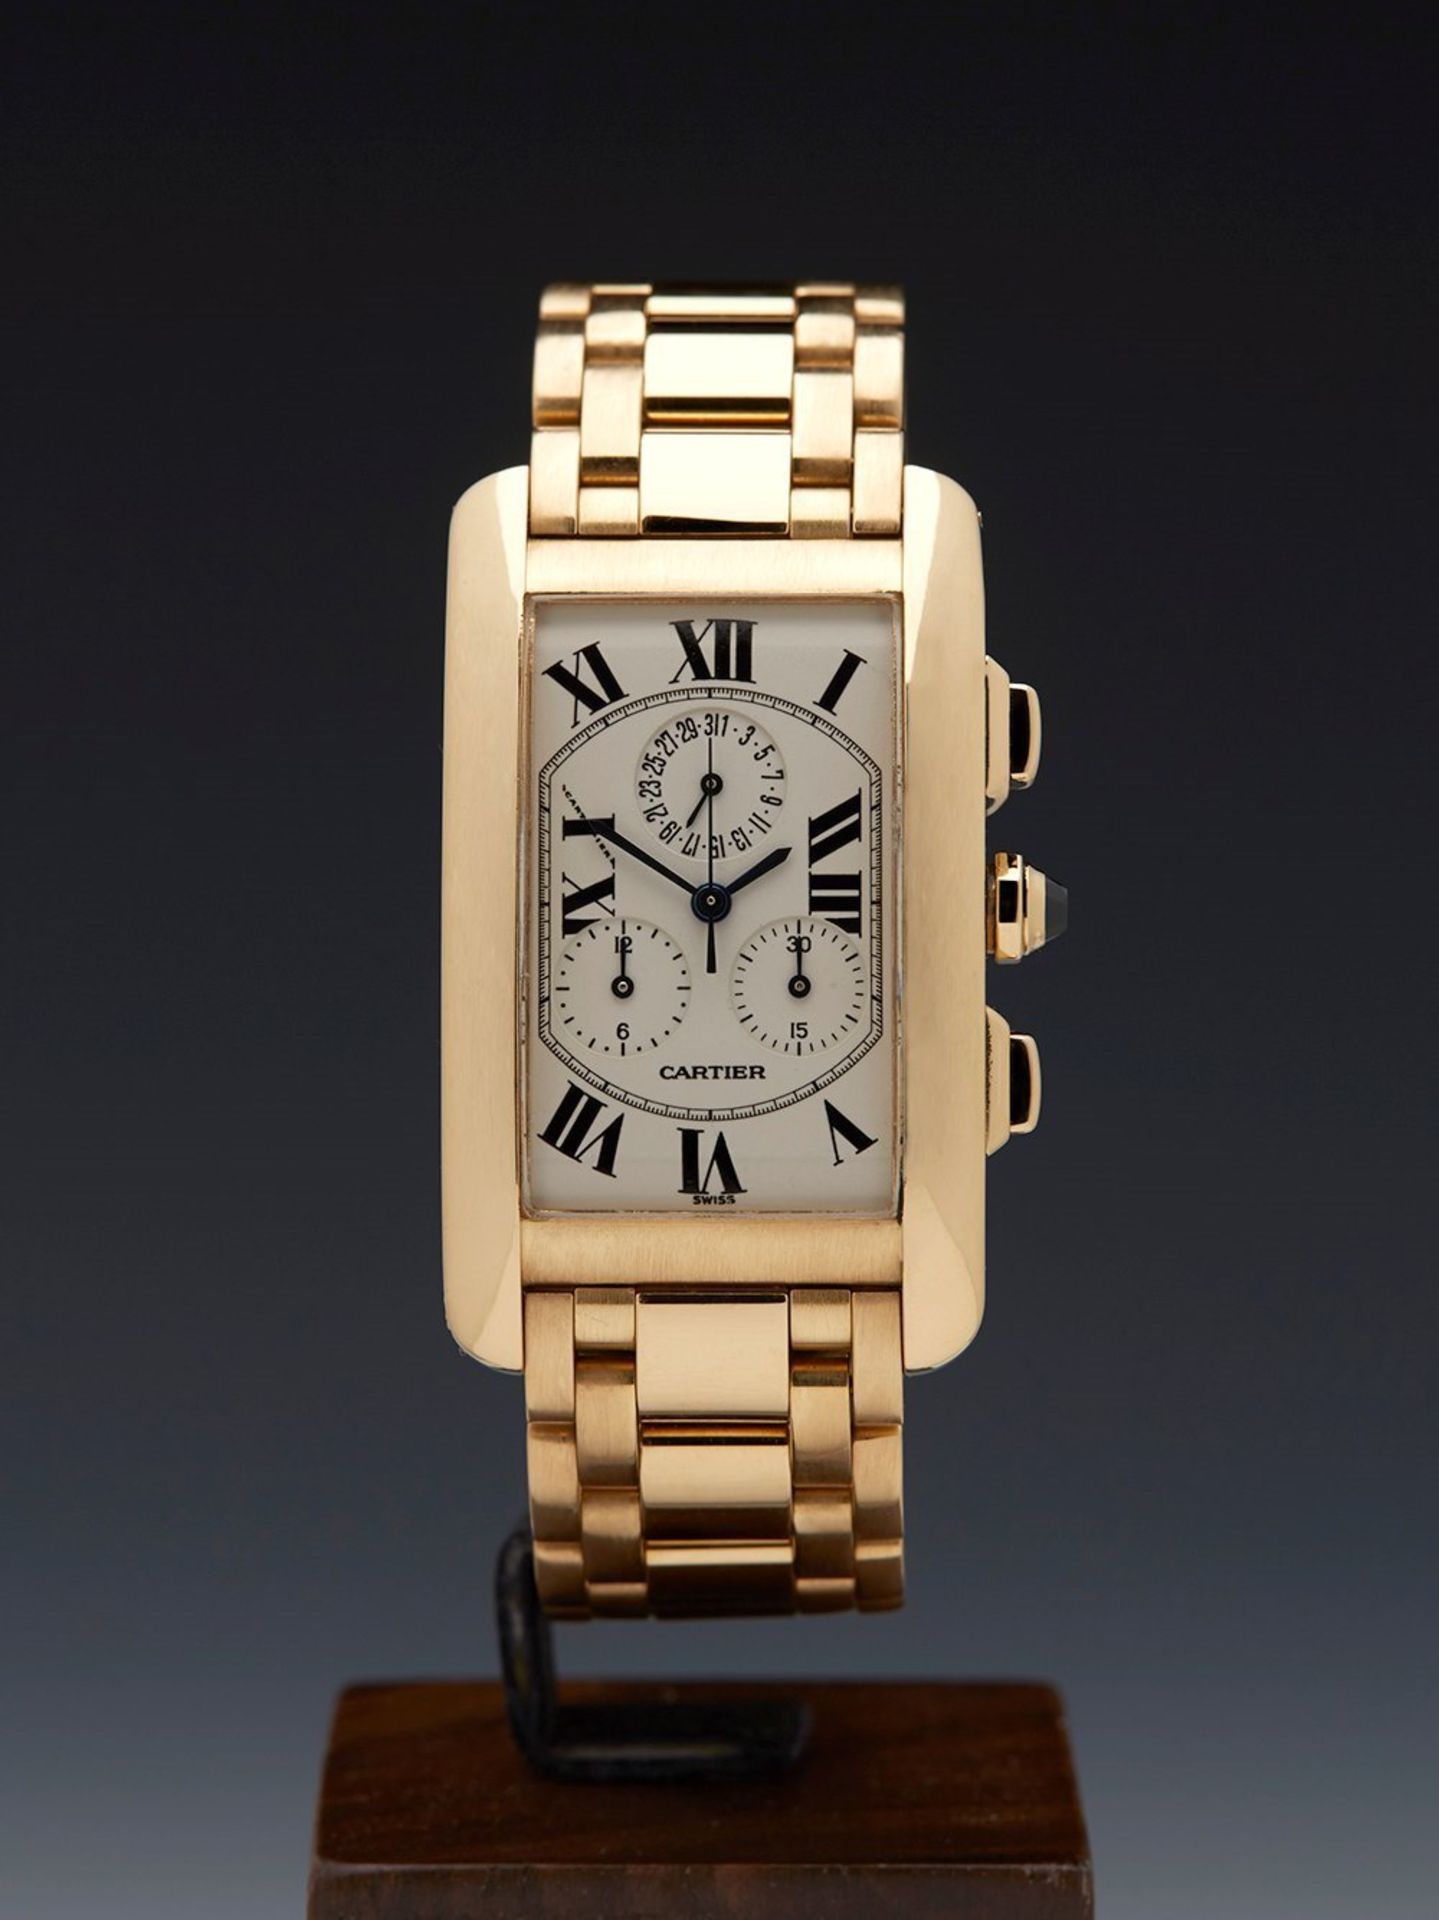 Cartier, Tank Americaine Chronograph 18k Yellow Gold W2601156 - Image 3 of 10